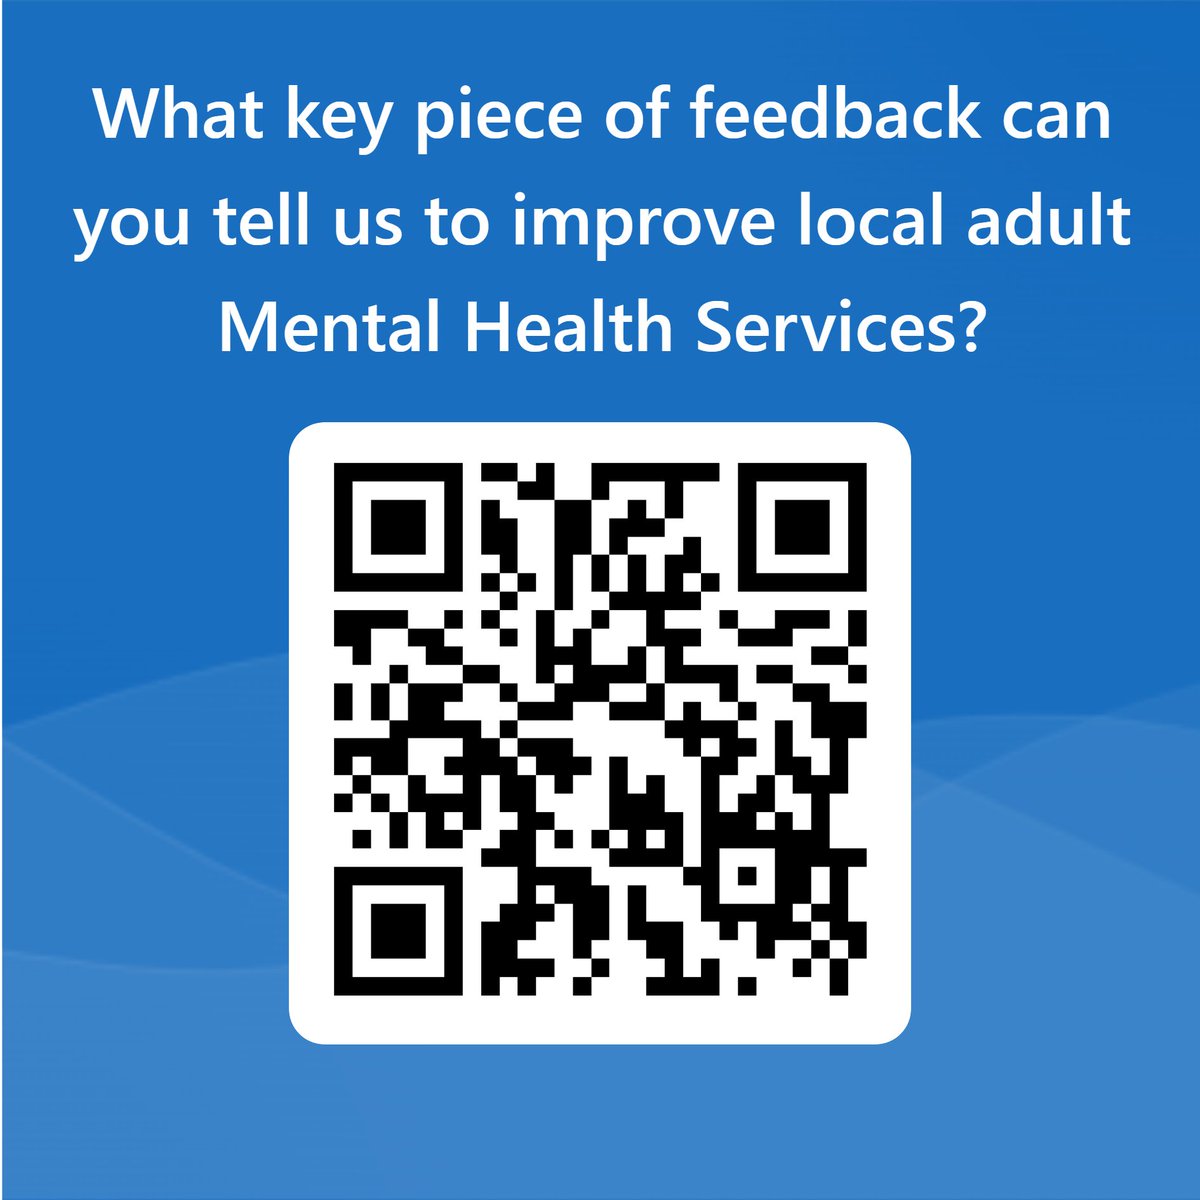 Are you a patient or carer who has experienced our Adult Mental Health Services across Hull and East Riding? Please leave us some feedback by clicking this link: forms.office.com/e/JVCXGkk60P or scanning the QR code below.